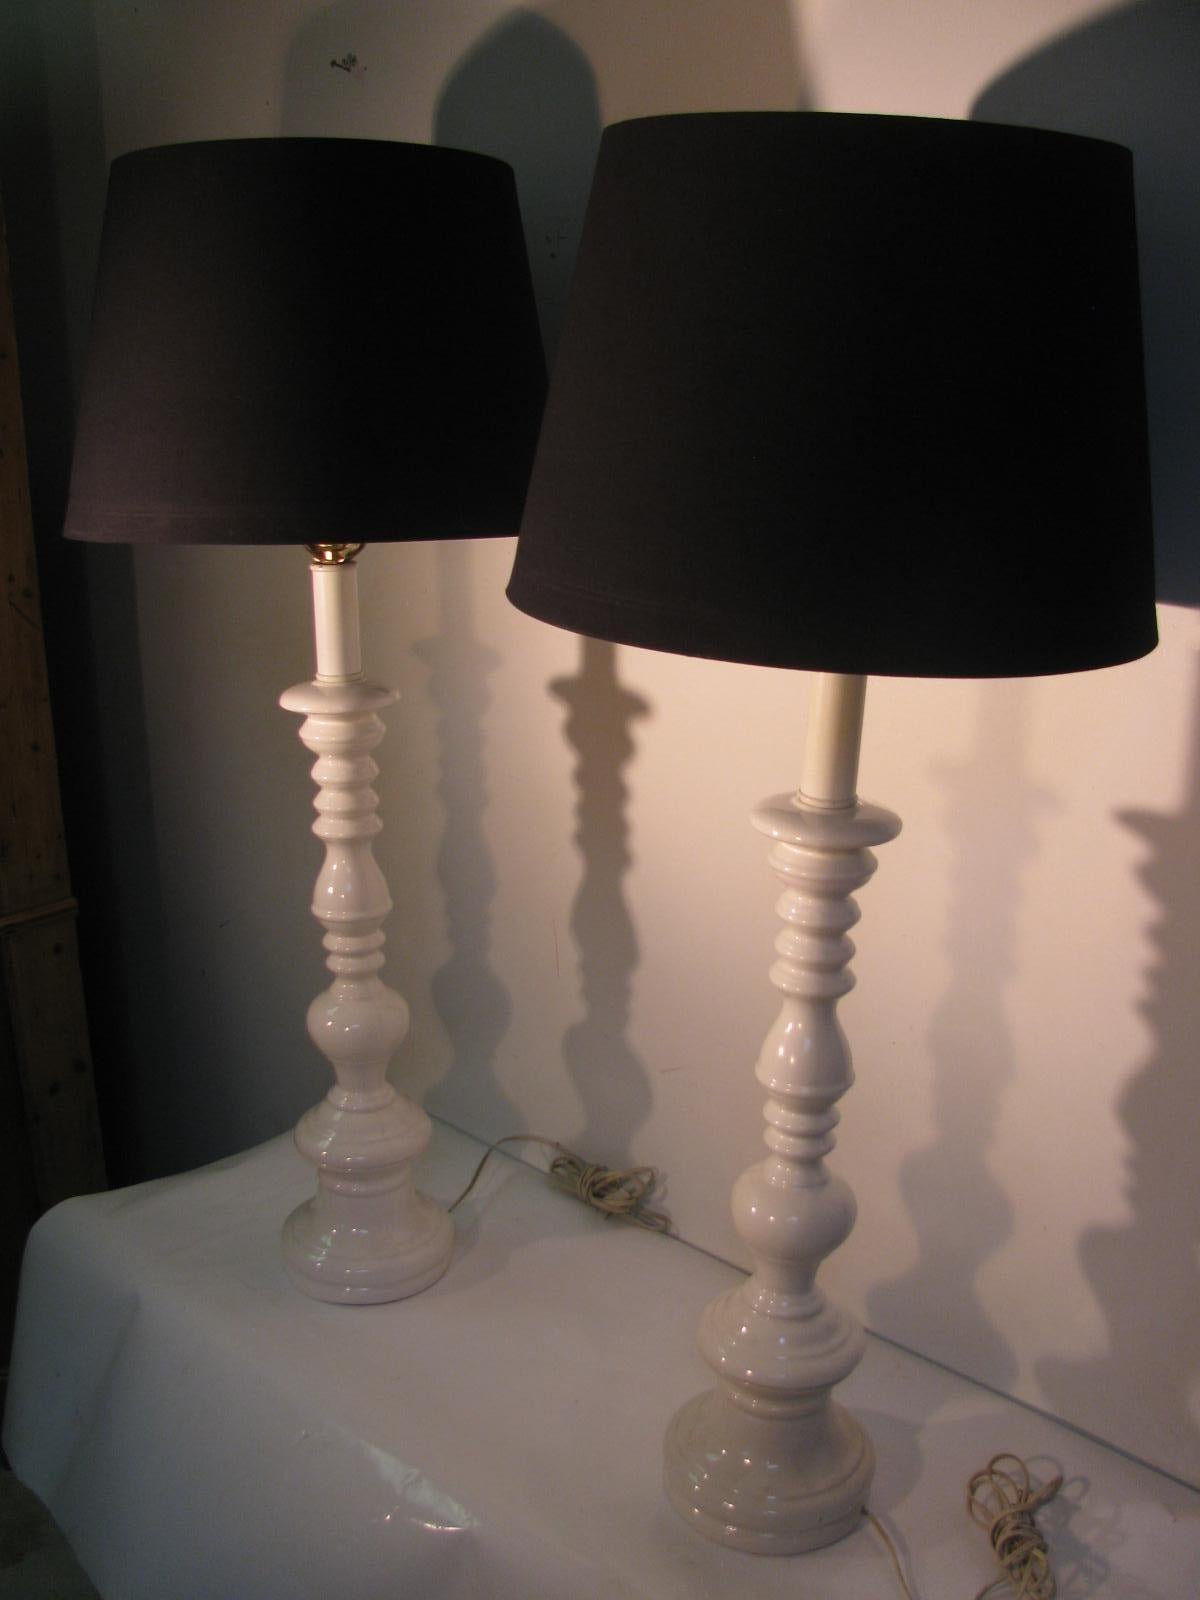 American Pair of Tall Mid-Century Modern Classical Styled Porcelain Table Lamps For Sale